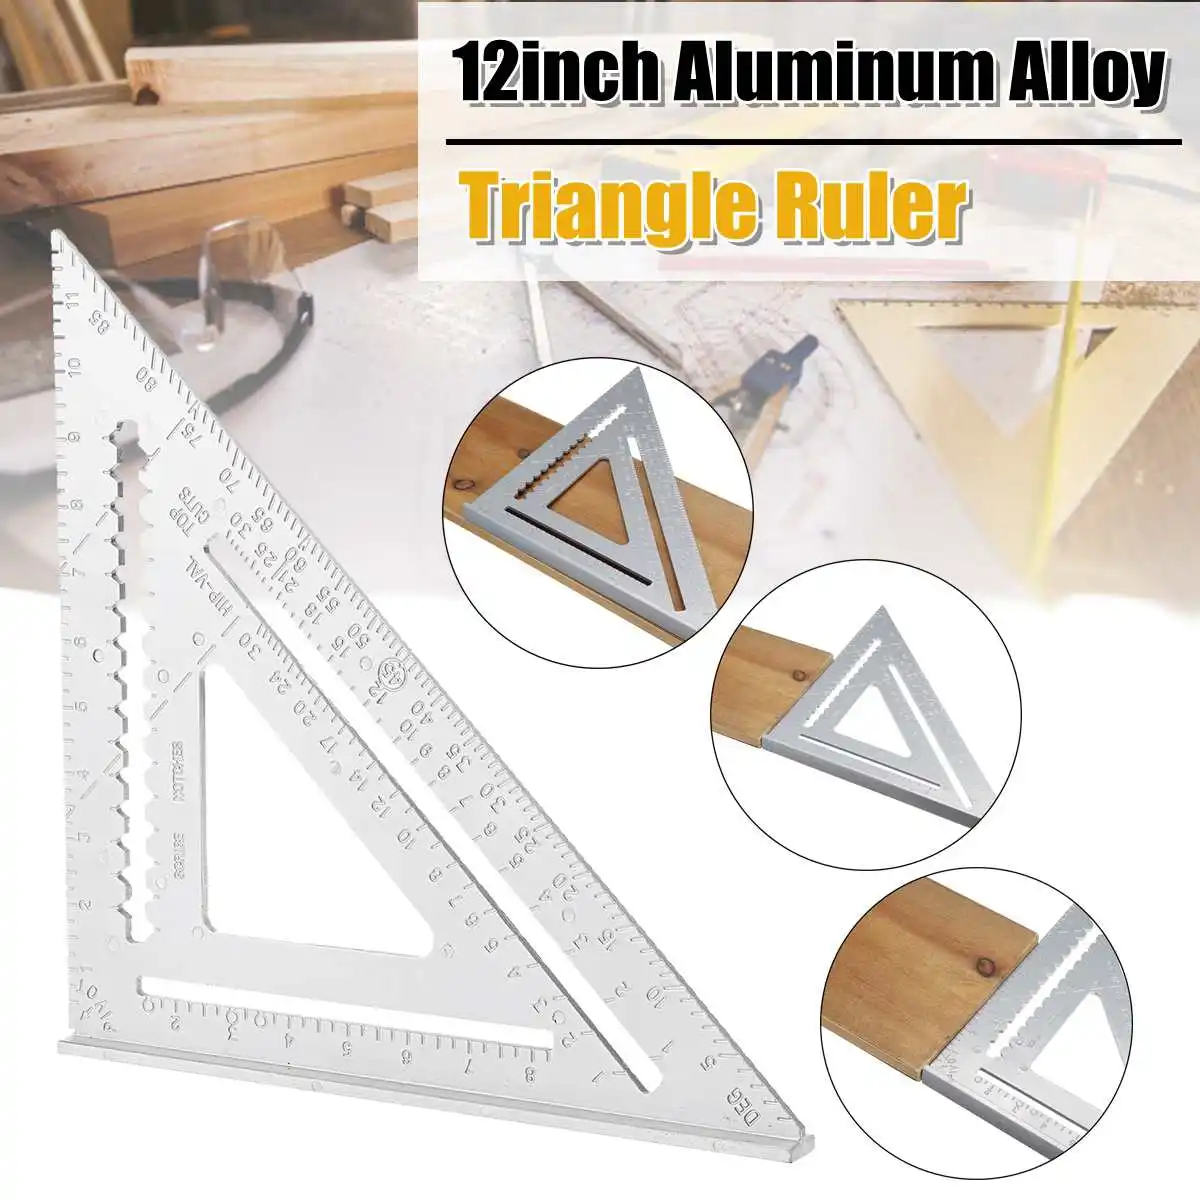 

Angle Ruler 12 inch Imperial Aluminum Alloy Triangular Measuring Ruler Woodwork Speed Square Triangle Angle Protractor